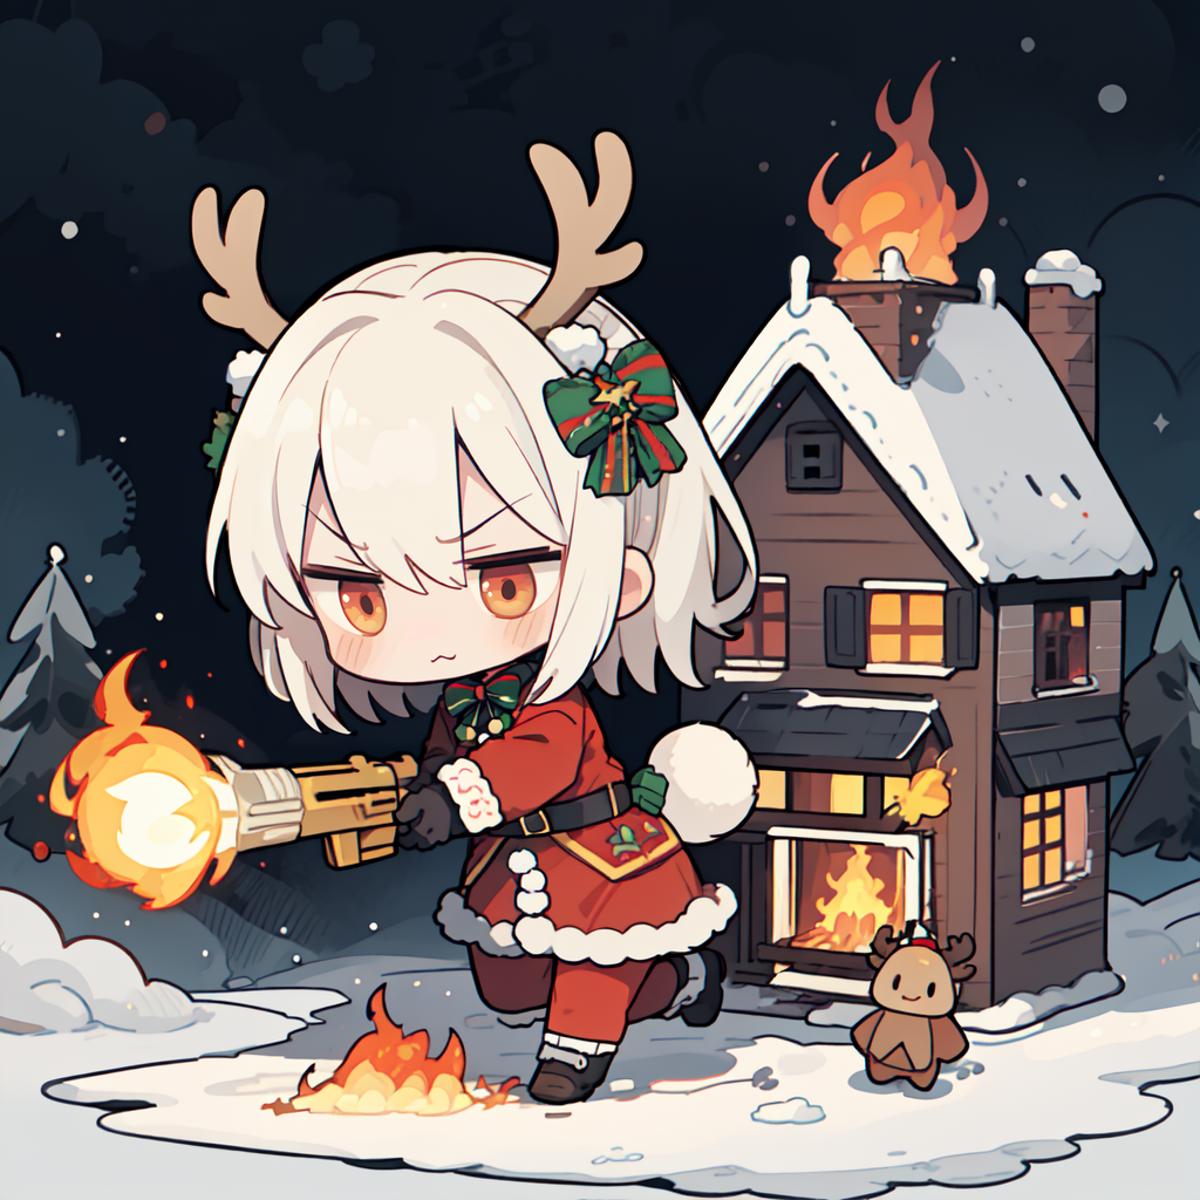 An Anime Character with a Gun and Santa Hat in Front of a House.